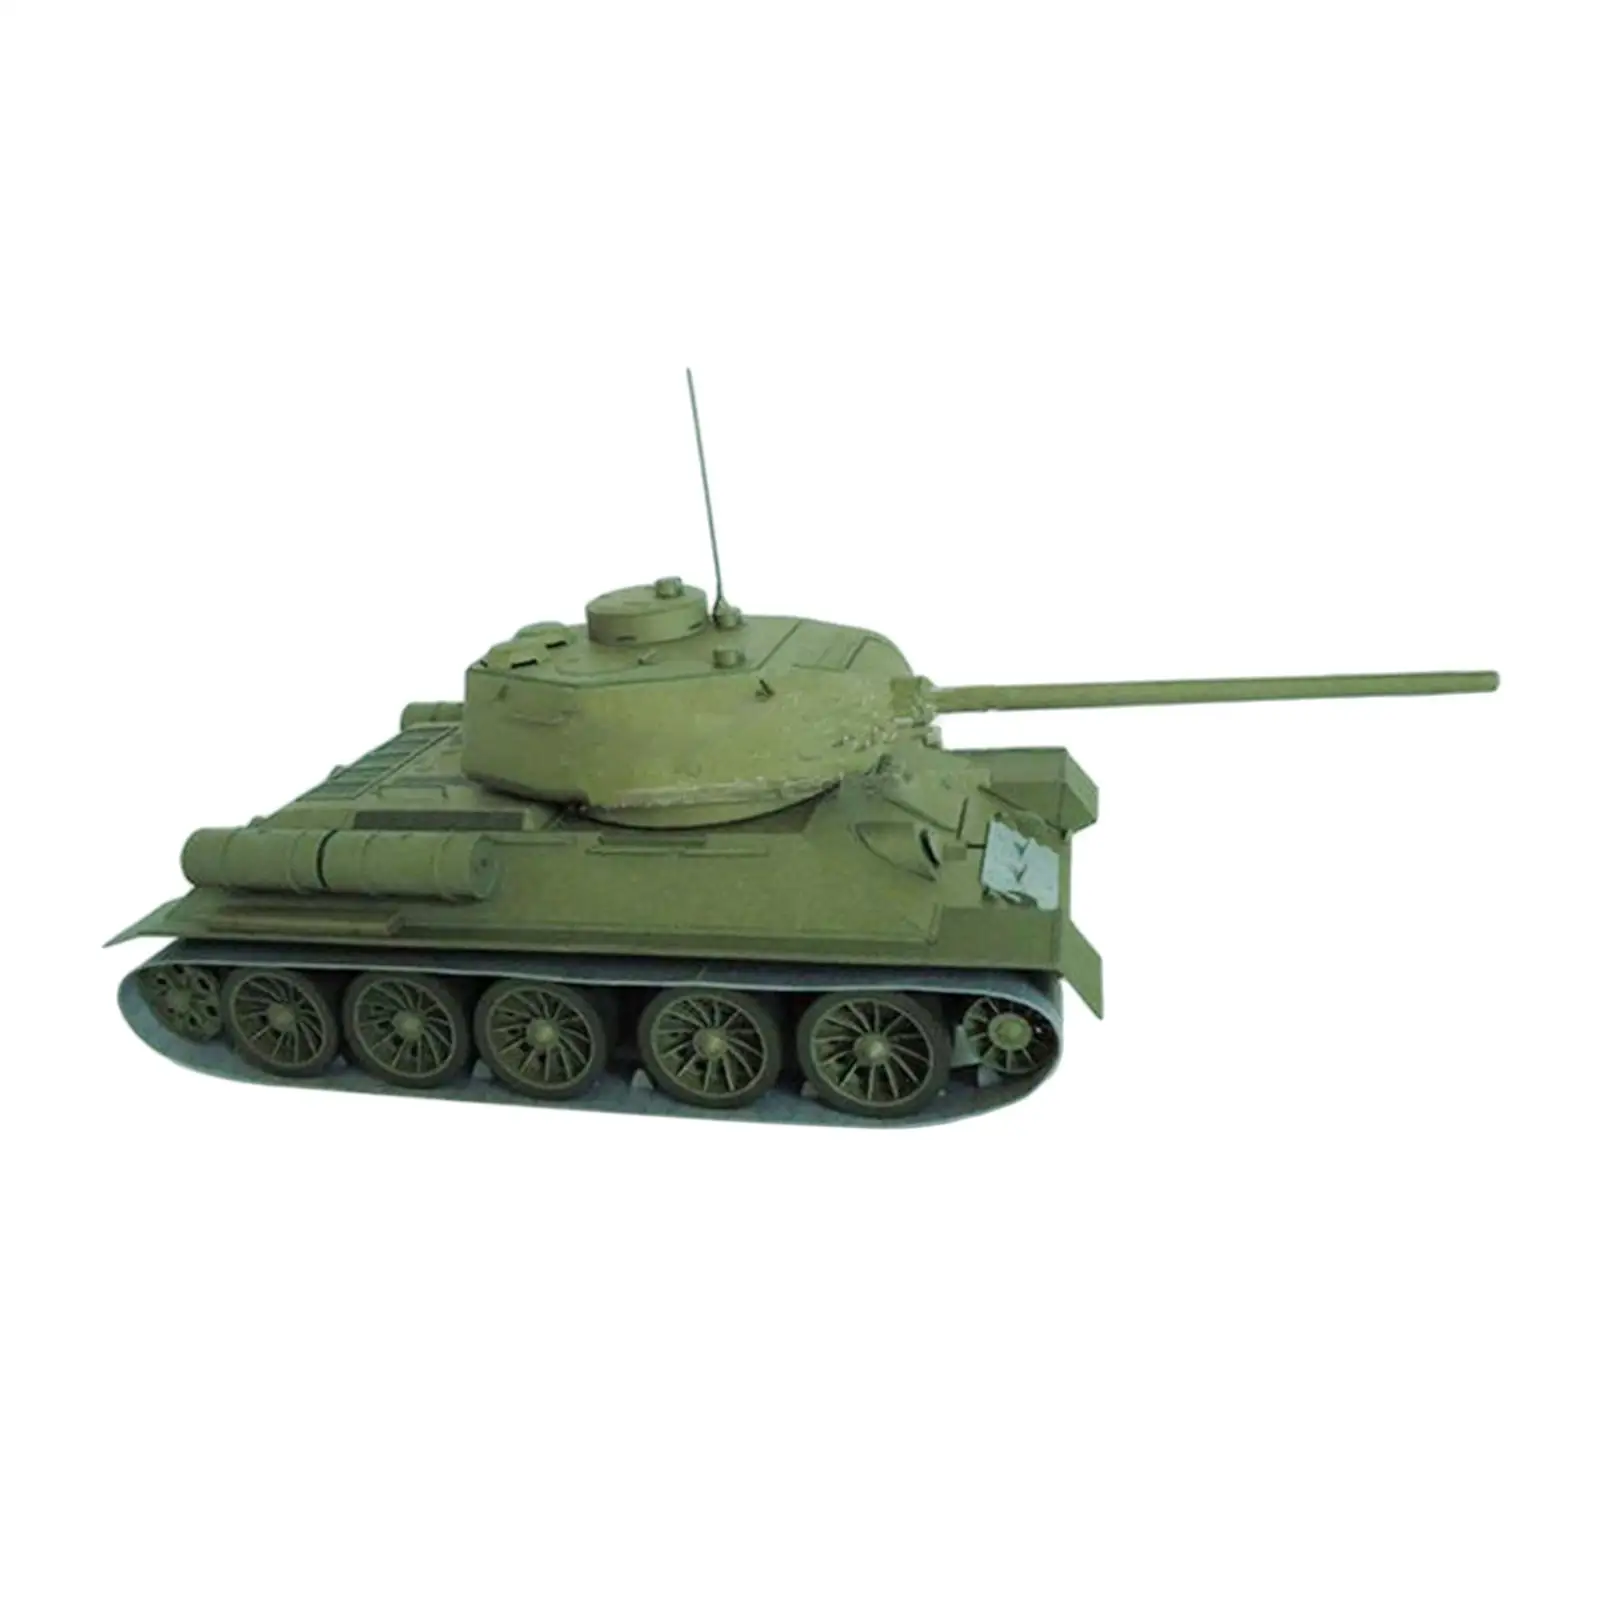 

1:25 Scale Tank Model Educational Toys Collectables Paper Model Kit 3D Paper Puzzle Cardboard Tabletop Decor for Kids Boys